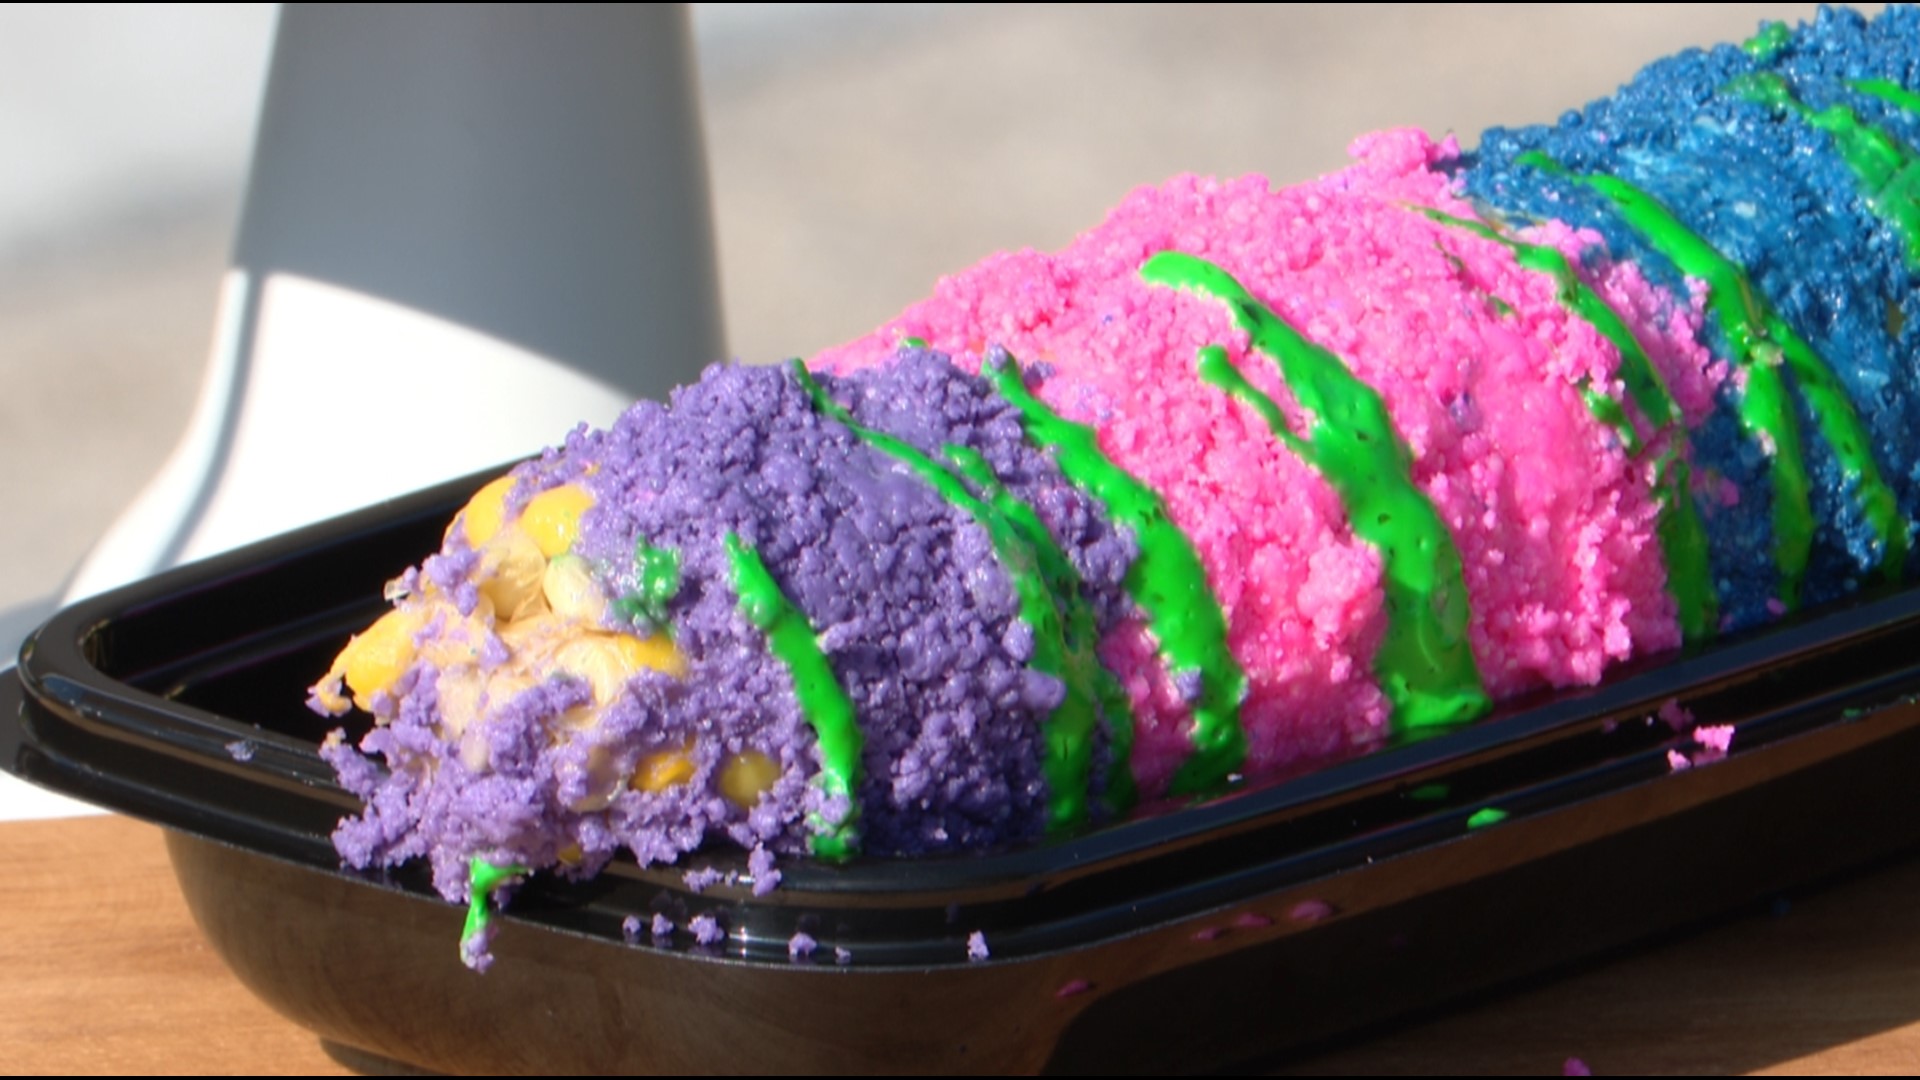 Chow down on rainbow elote and cornbread funnel cake at Valleyfair's Corn  Fest this weekend